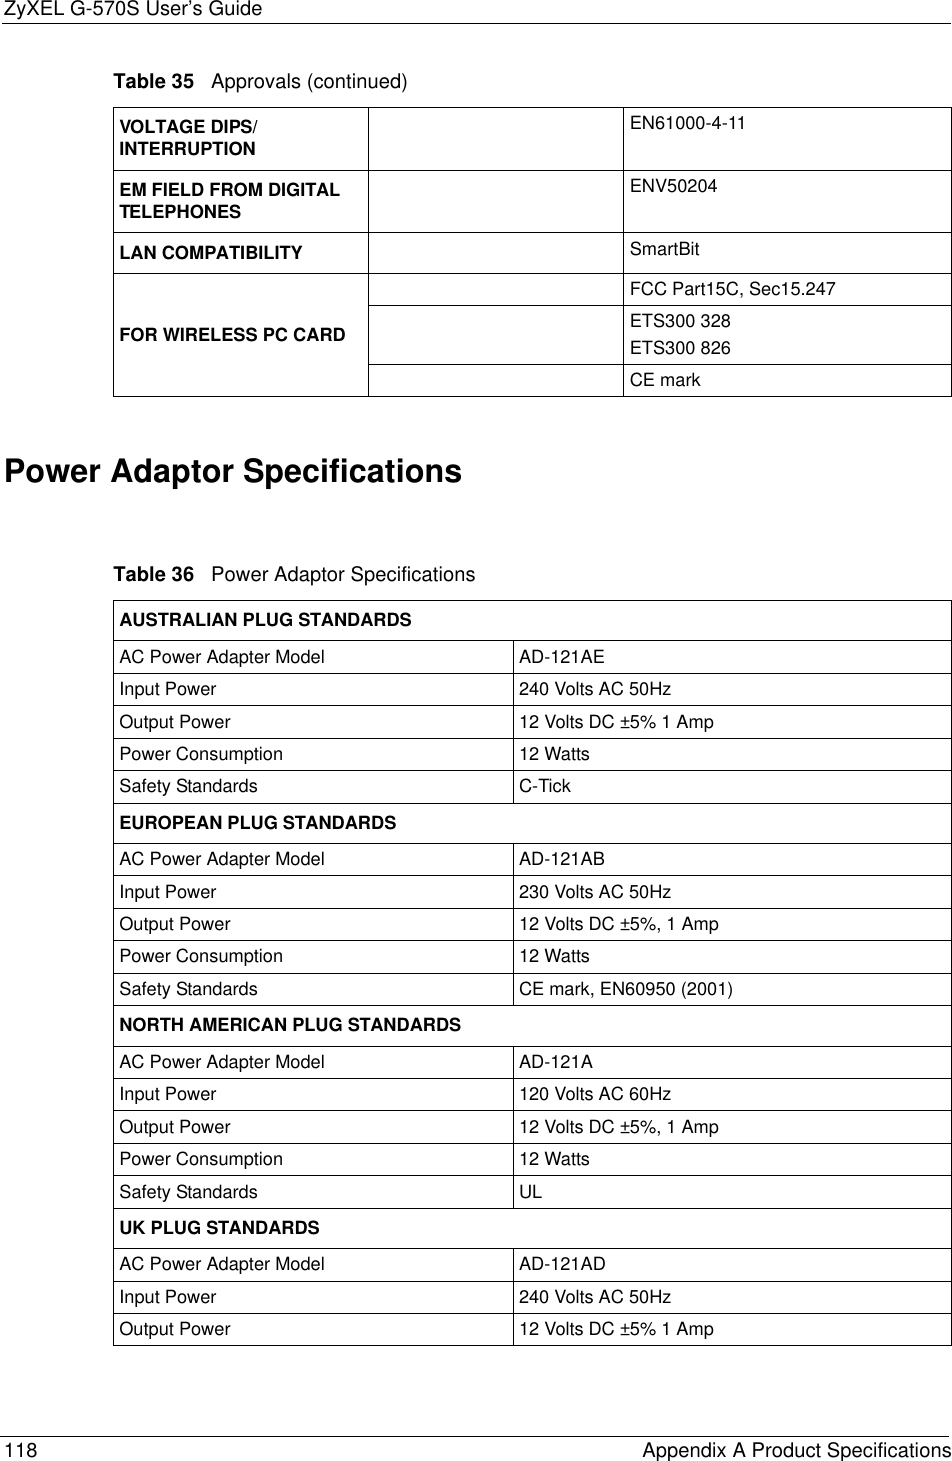 ZyXEL G-570S User’s Guide118 Appendix A Product SpecificationsPower Adaptor SpecificationsVOLTAGE DIPS/INTERRUPTIONEN61000-4-11EM FIELD FROM DIGITAL TELEPHONESENV50204LAN COMPATIBILITY SmartBitFOR WIRELESS PC CARD FCC Part15C, Sec15.247ETS300 328ETS300 826CE markTable 35   Approvals (continued)Table 36   Power Adaptor SpecificationsAUSTRALIAN PLUG STANDARDSAC Power Adapter Model AD-121AEInput Power 240 Volts AC 50Hz Output Power 12 Volts DC ±5% 1 AmpPower Consumption 12 WattsSafety Standards  C-TickEUROPEAN PLUG STANDARDSAC Power Adapter Model AD-121ABInput Power 230 Volts AC 50Hz Output Power 12 Volts DC ±5%, 1 Amp Power Consumption 12 WattsSafety Standards  CE mark, EN60950 (2001)NORTH AMERICAN PLUG STANDARDSAC Power Adapter Model  AD-121AInput Power 120 Volts AC 60HzOutput Power  12 Volts DC ±5%, 1 Amp Power Consumption 12 WattsSafety Standards  ULUK PLUG STANDARDSAC Power Adapter Model AD-121ADInput Power 240 Volts AC 50Hz Output Power 12 Volts DC ±5% 1 Amp